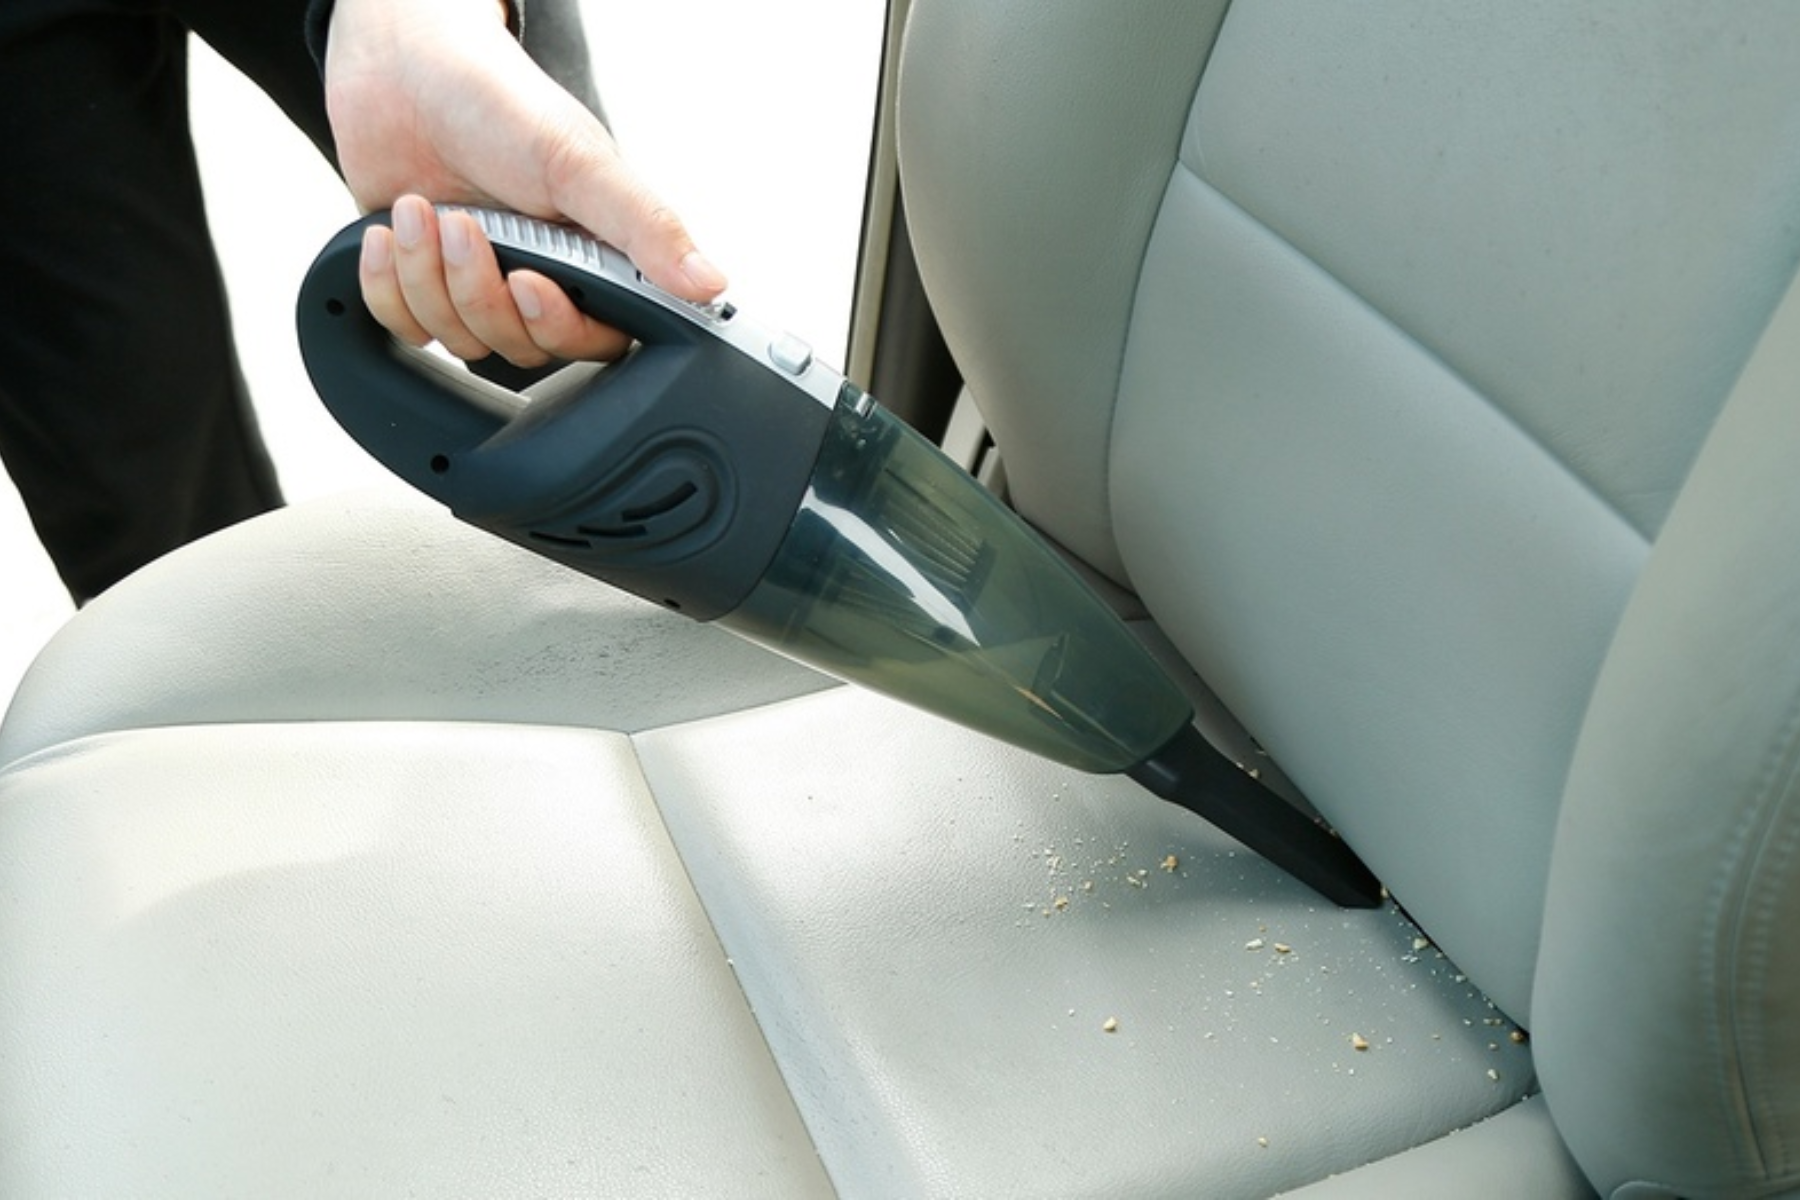 How to choose the right portable car vacuum cleaner for your needs?